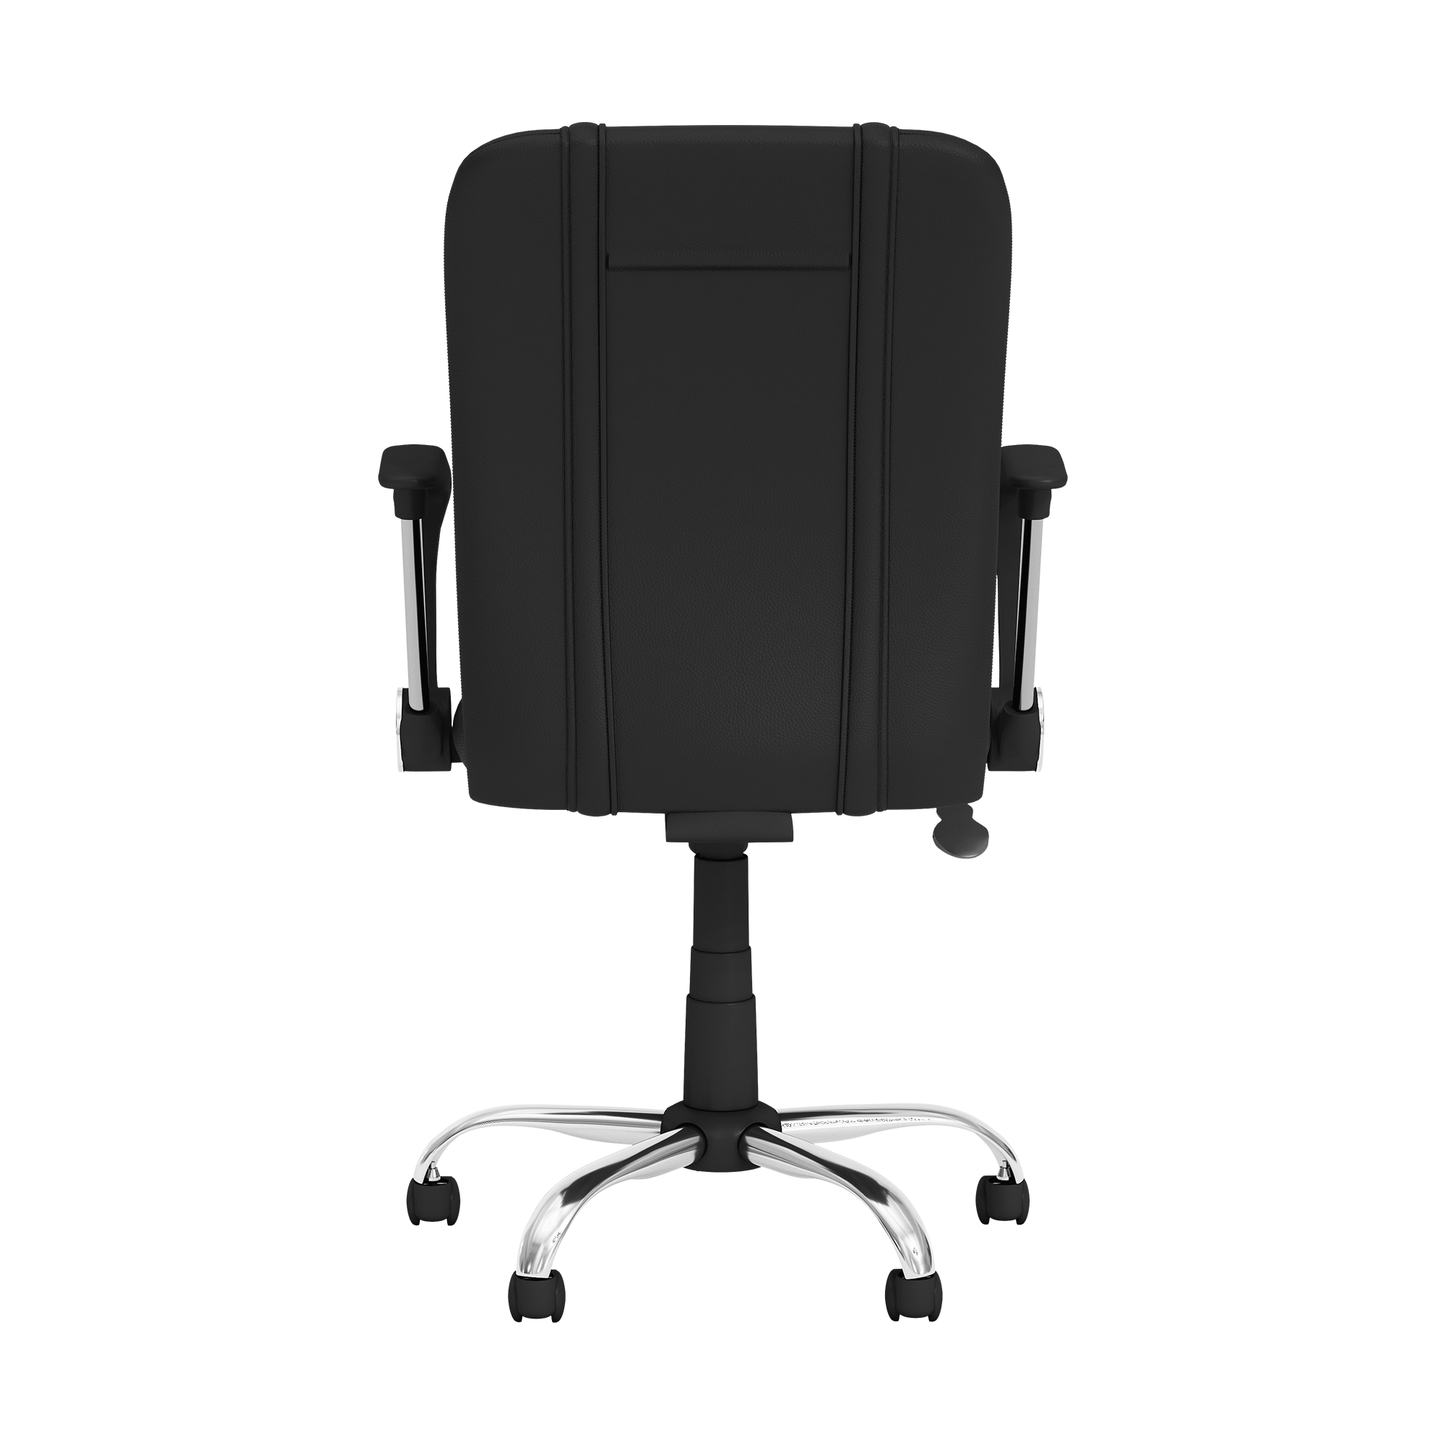 Curve Task Chair with Ohio State Primary Logo